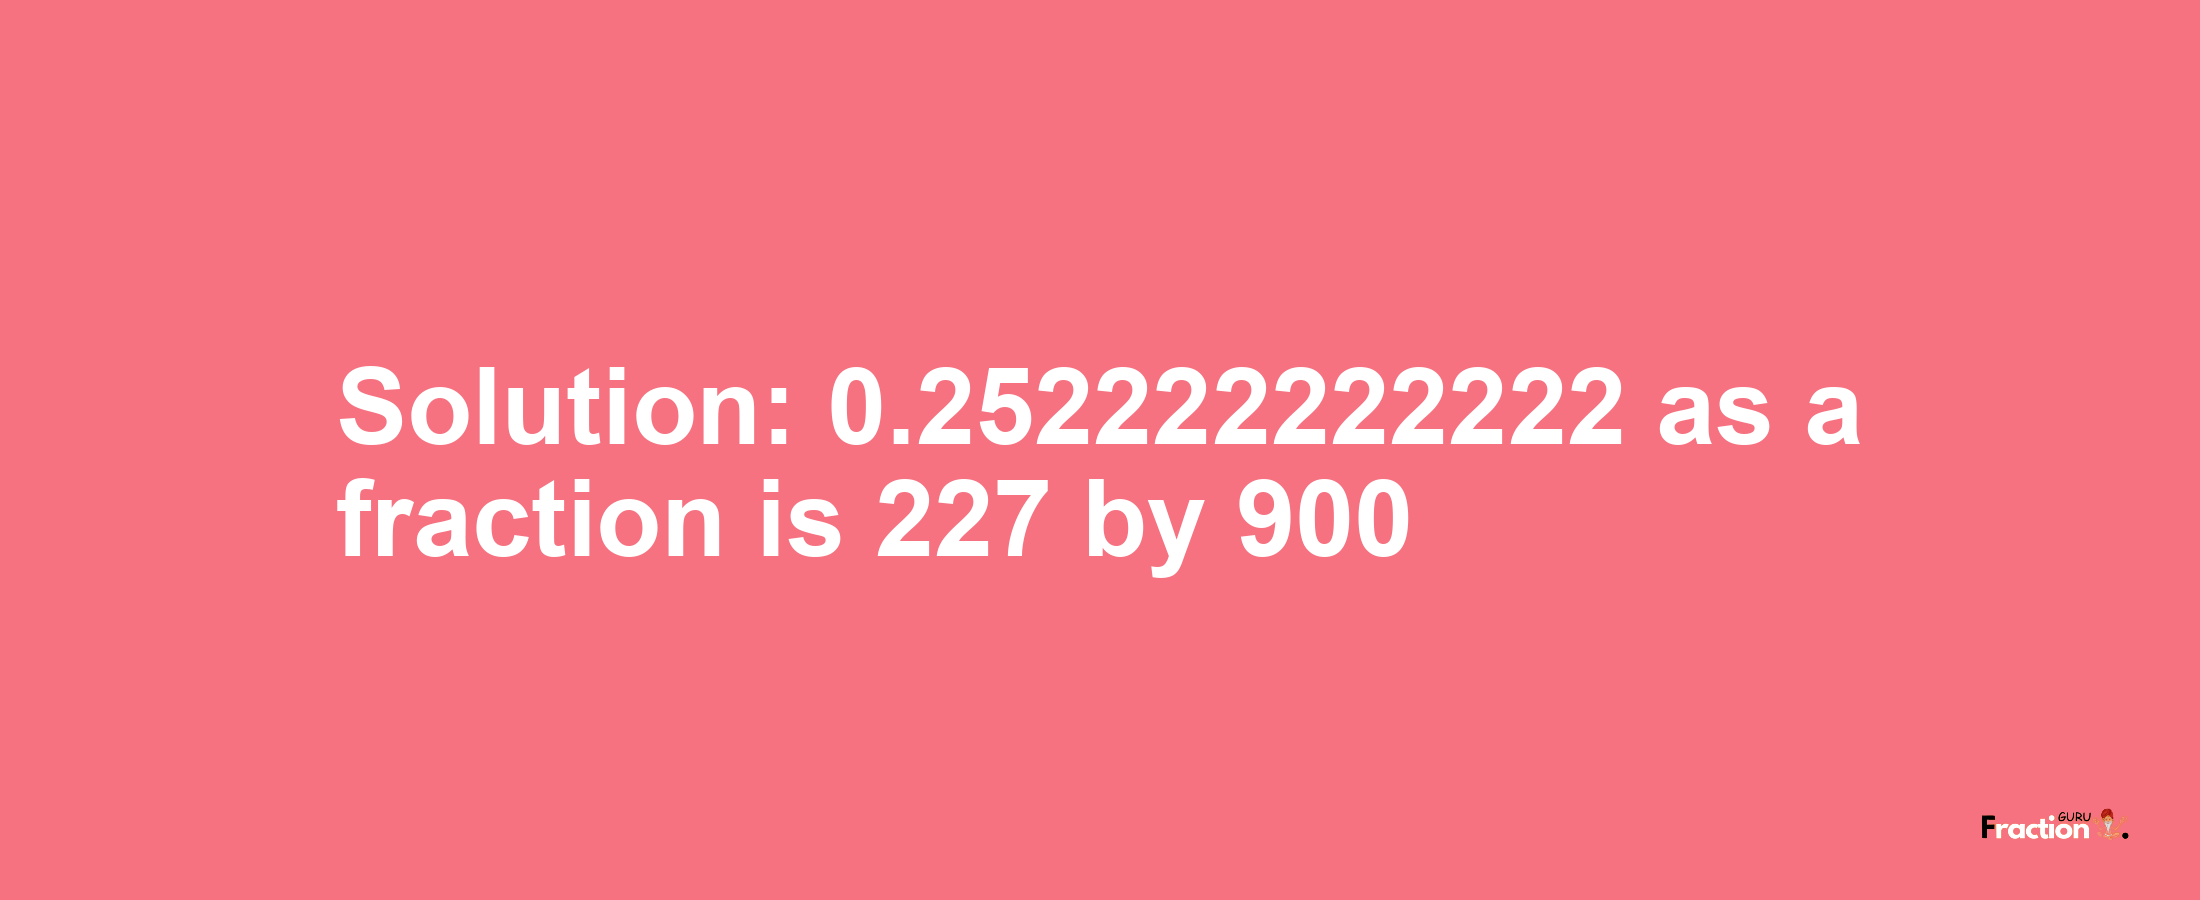 Solution:0.252222222222 as a fraction is 227/900